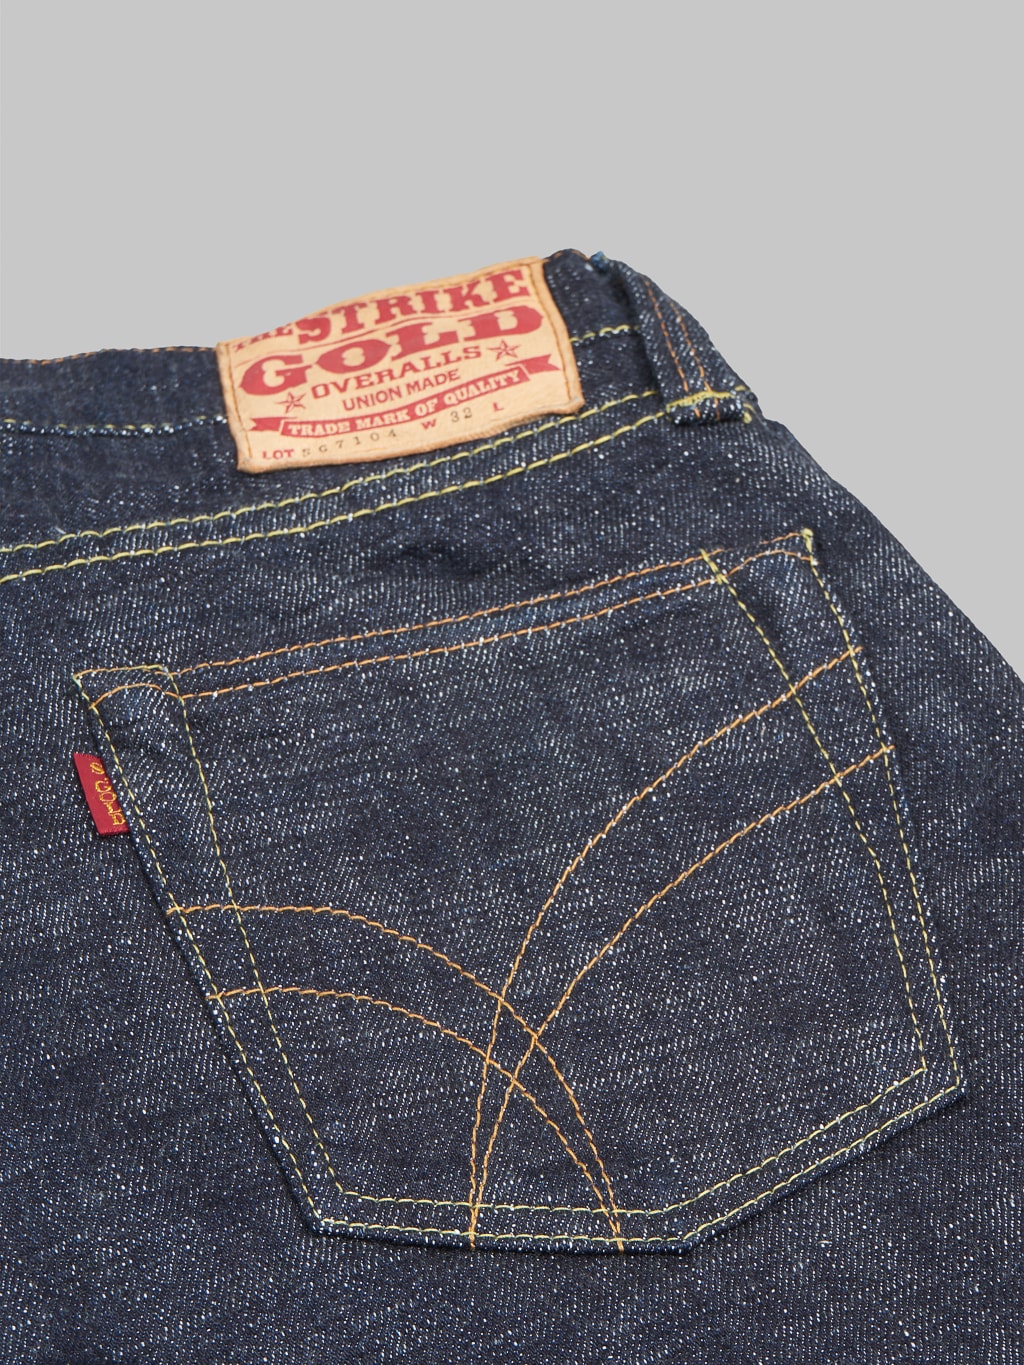 the strike gold 7104 ultra slubby straight tapered jeans closeup